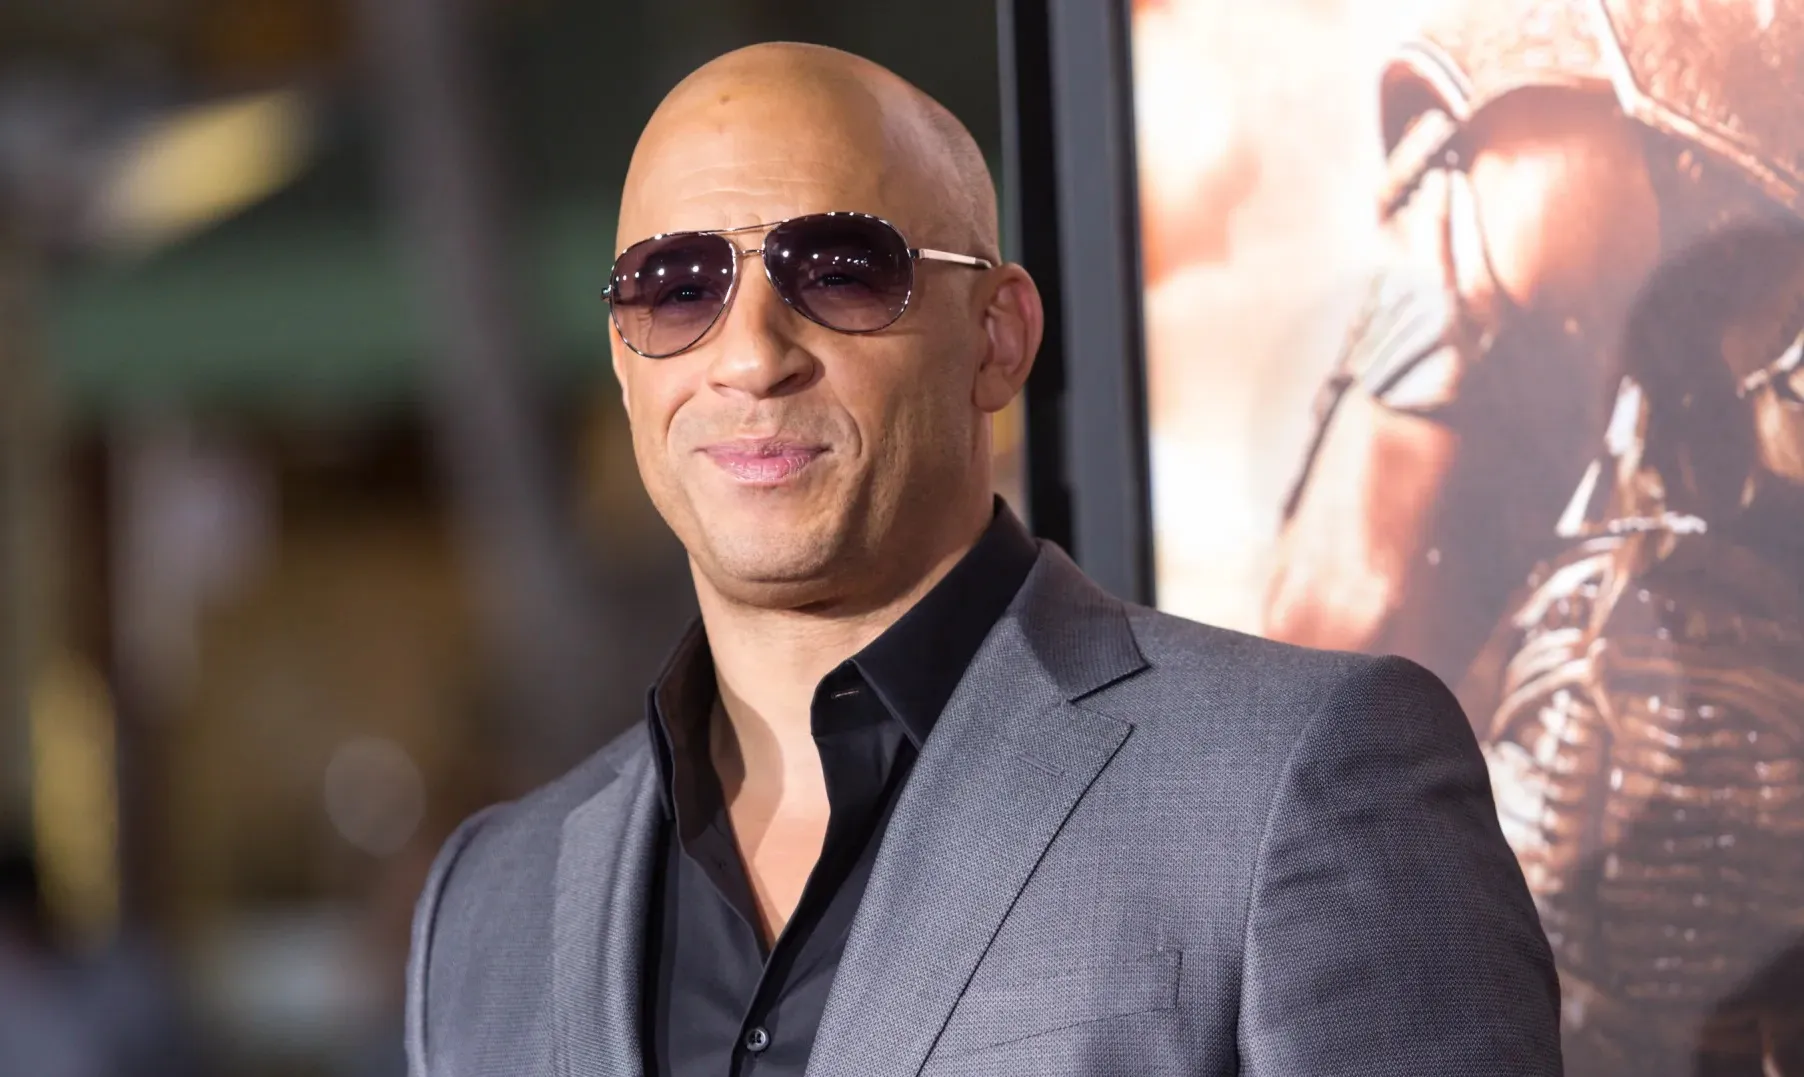 Vin Diesel spoke about the end of Fast and Furious - Gossibox.com